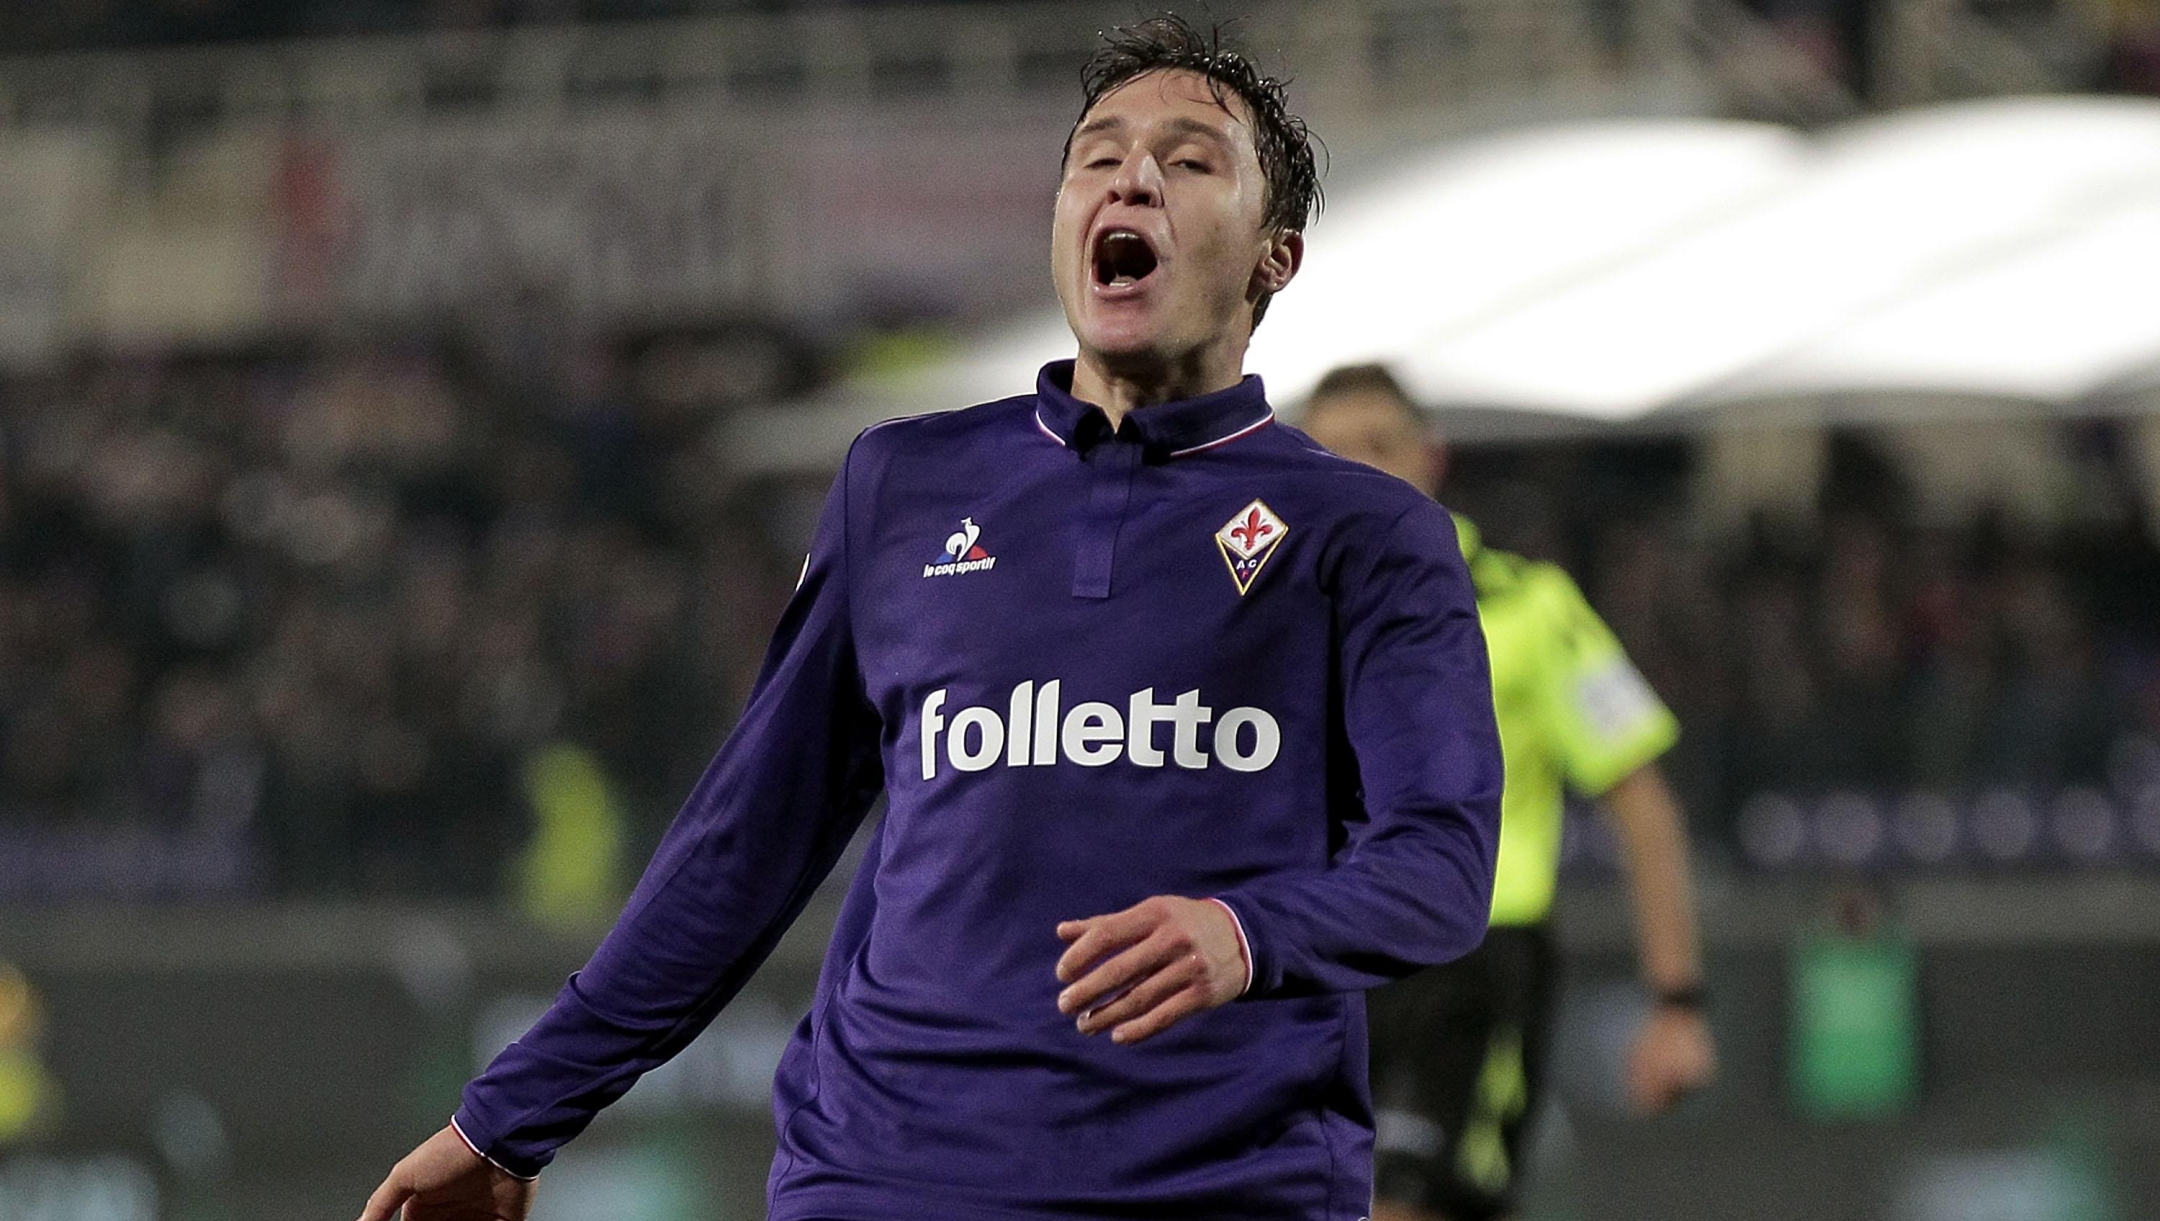 FLORENCE, ITALY - DECEMBER 22: Federico Chiesa of ACF Fiorentina reacts during the Serie A match between ACF Fiorentina and SSC Napoli at Stadio Artemio Franchi on December 22, 2016 in Florence, Italy.  (Photo by Gabriele Maltinti/Getty Images)